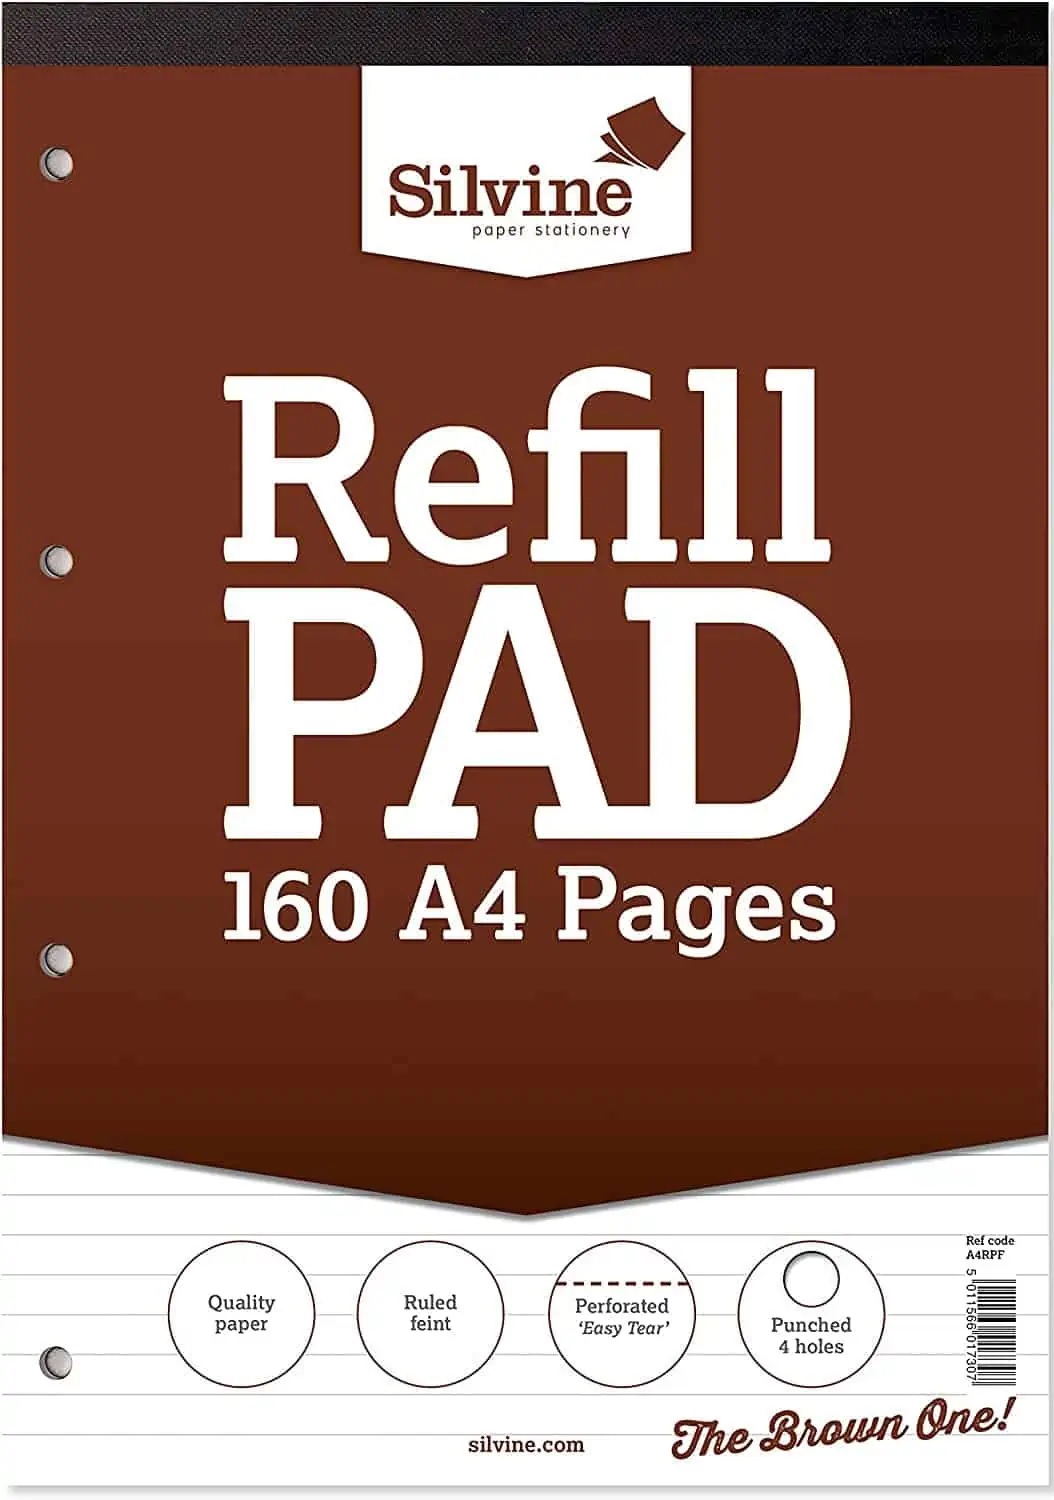 Silvine A4 Refill Pad, 160 pages, Feint (Brown cover)